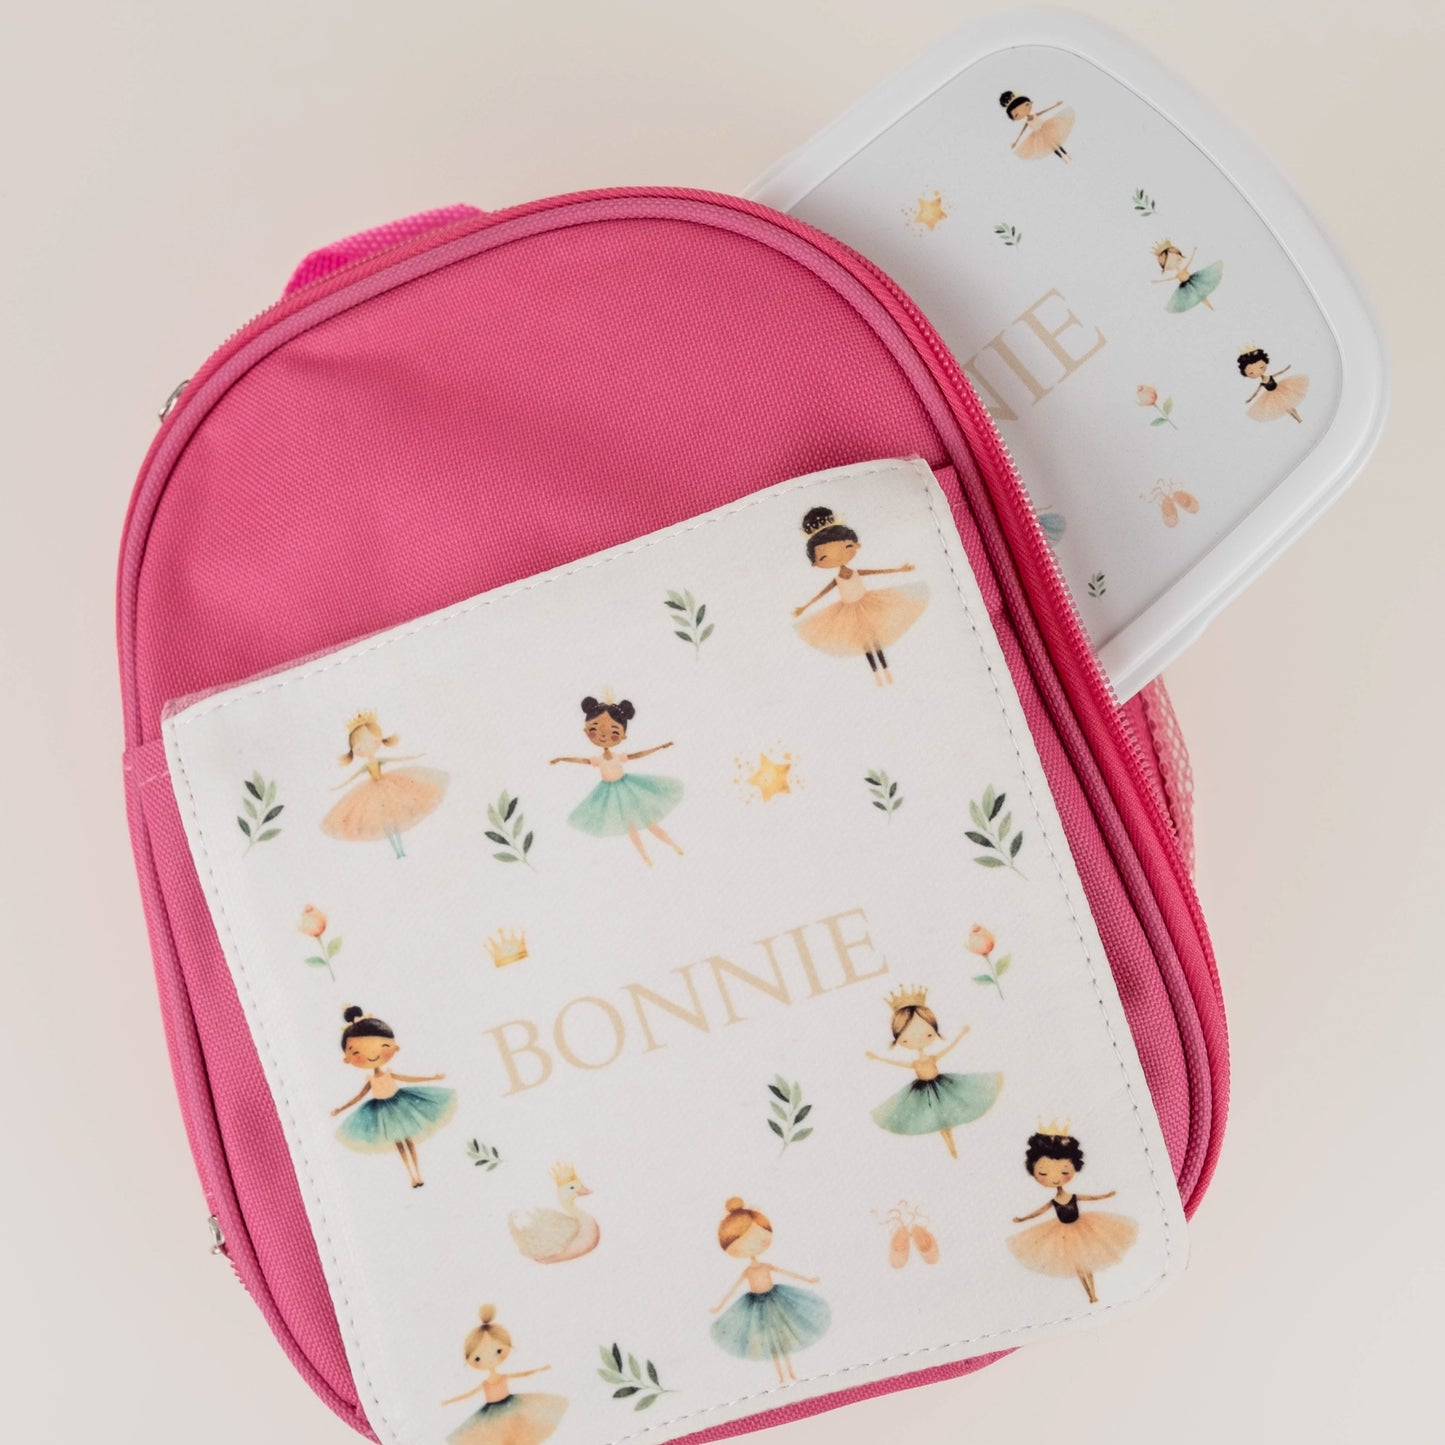 Children’s Personalised Lunch Bag and Box - Bright Mermaids